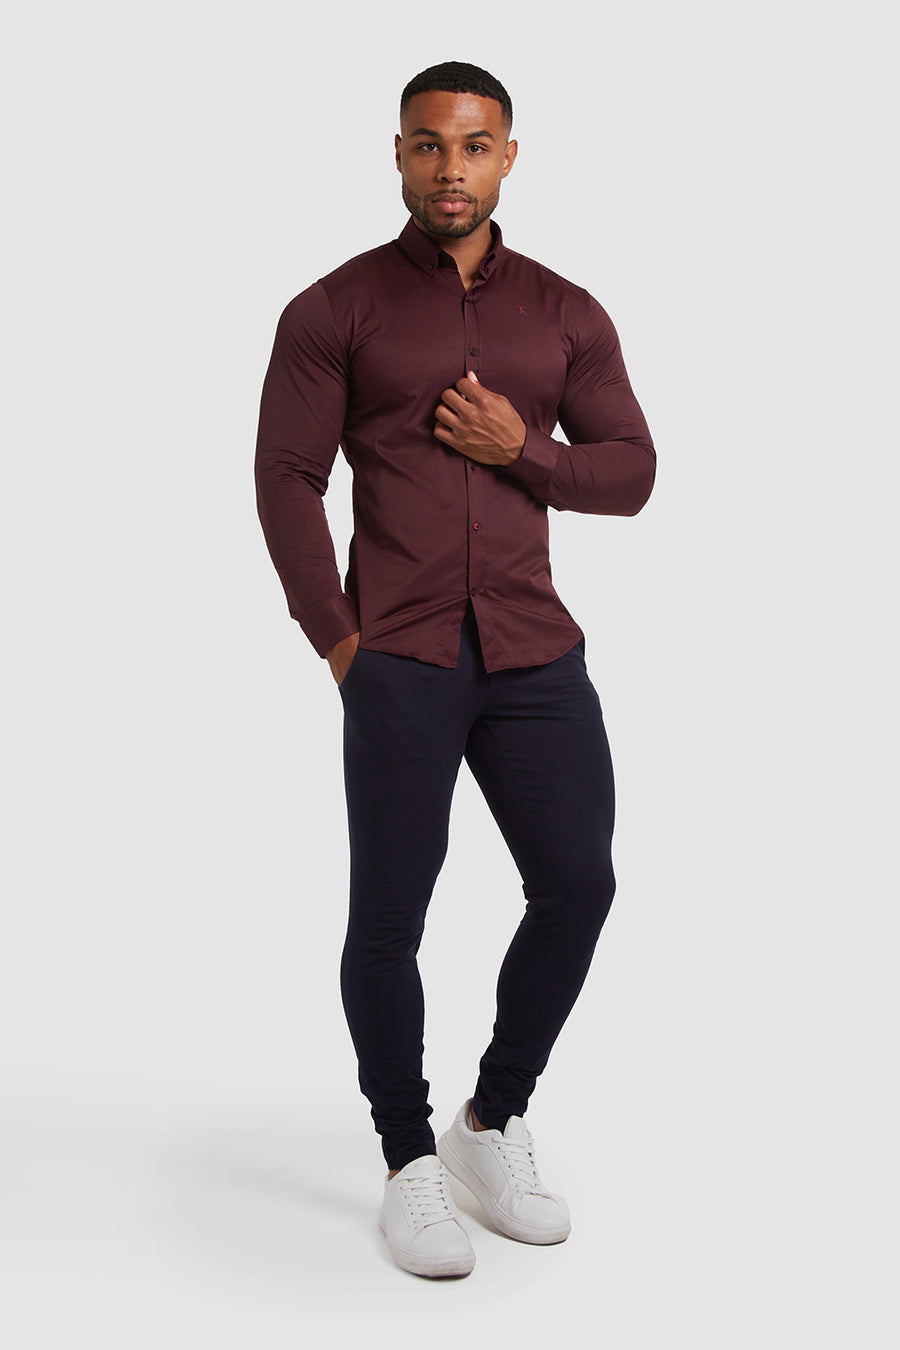 Muscle Fit Signature Shirt 2.0 in Burgundy - TAILORED ATHLETE - USA